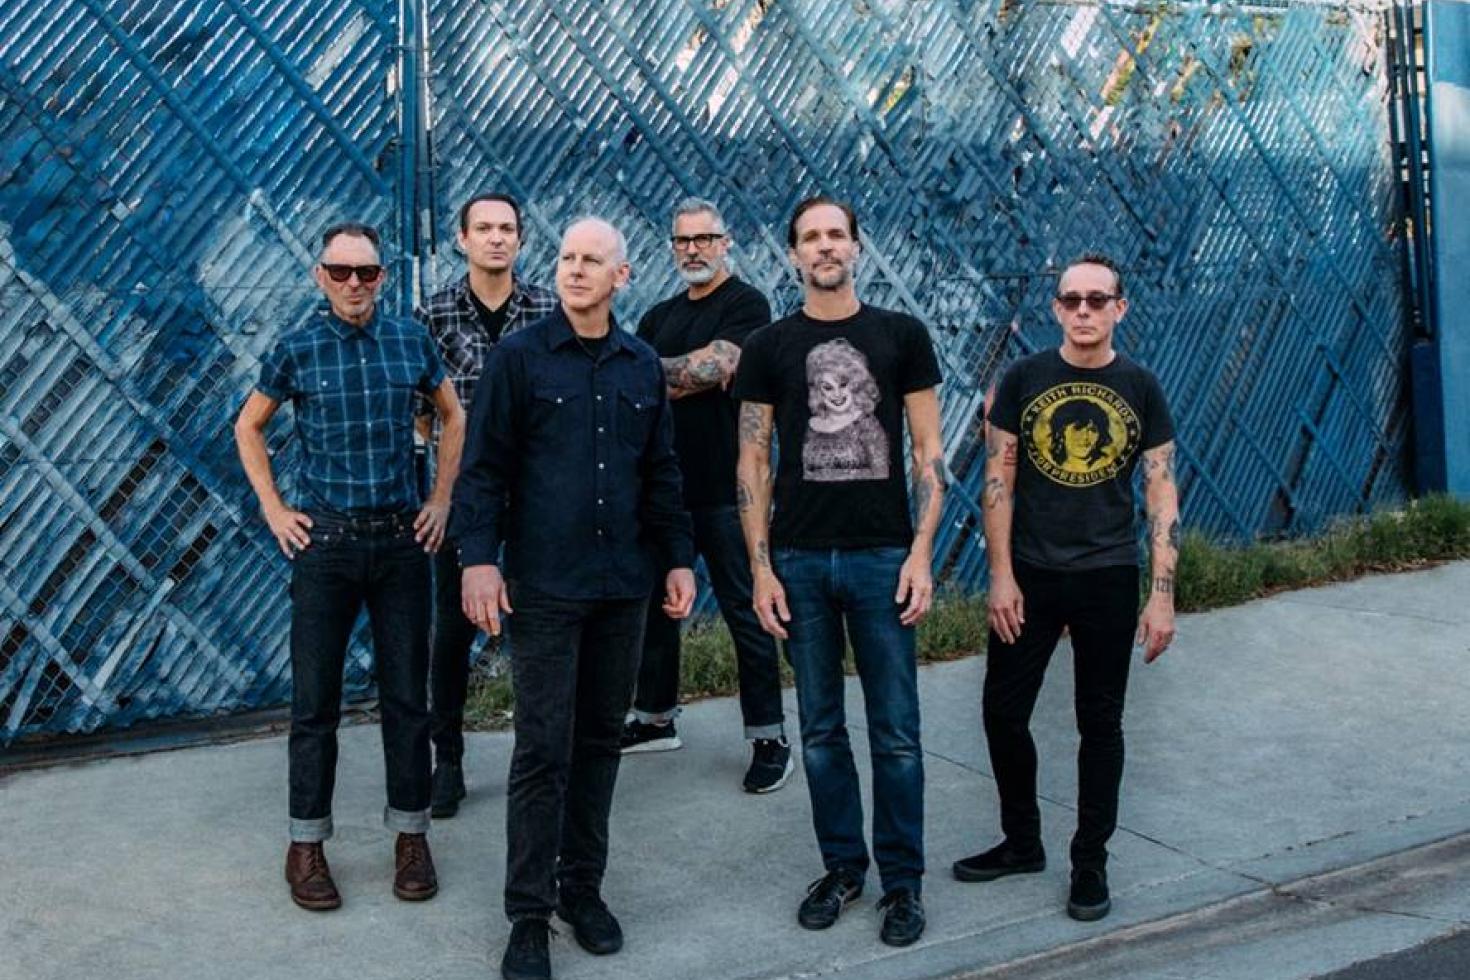 Bad Religion release new track 'What Are We Standing For'